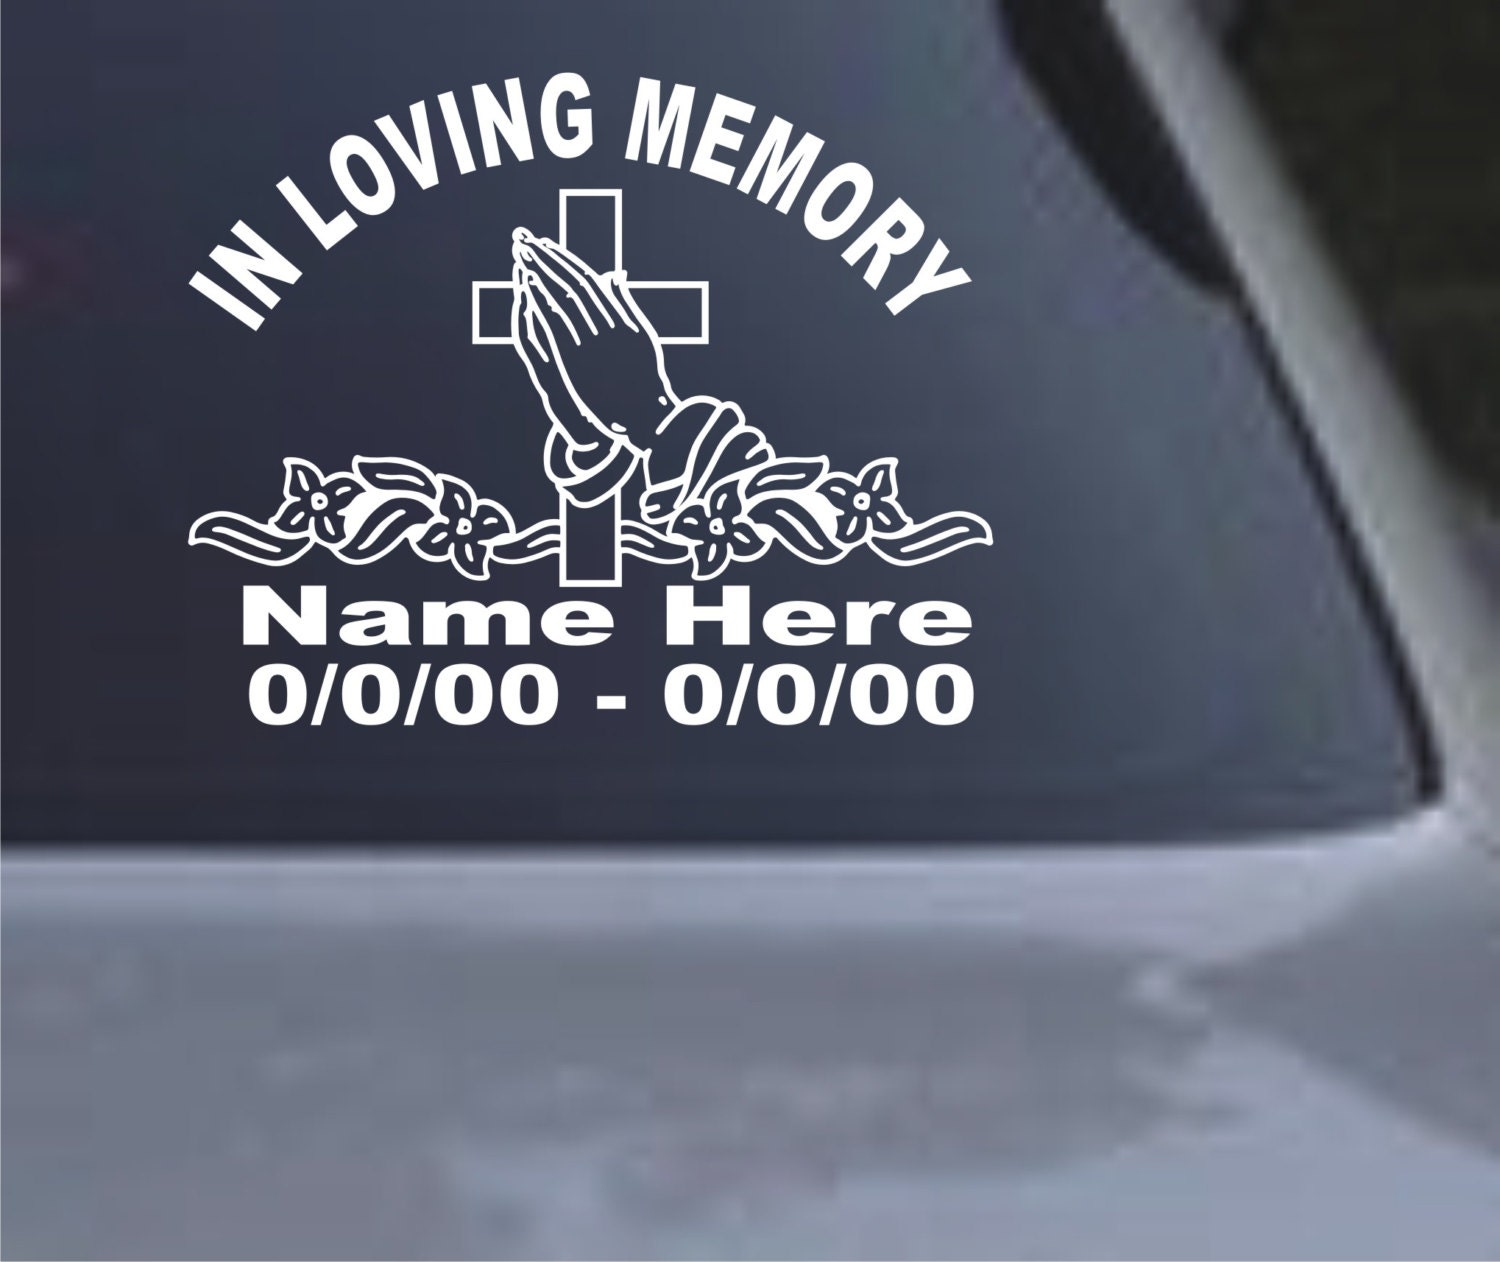 in loving memory vehicle picture stickers